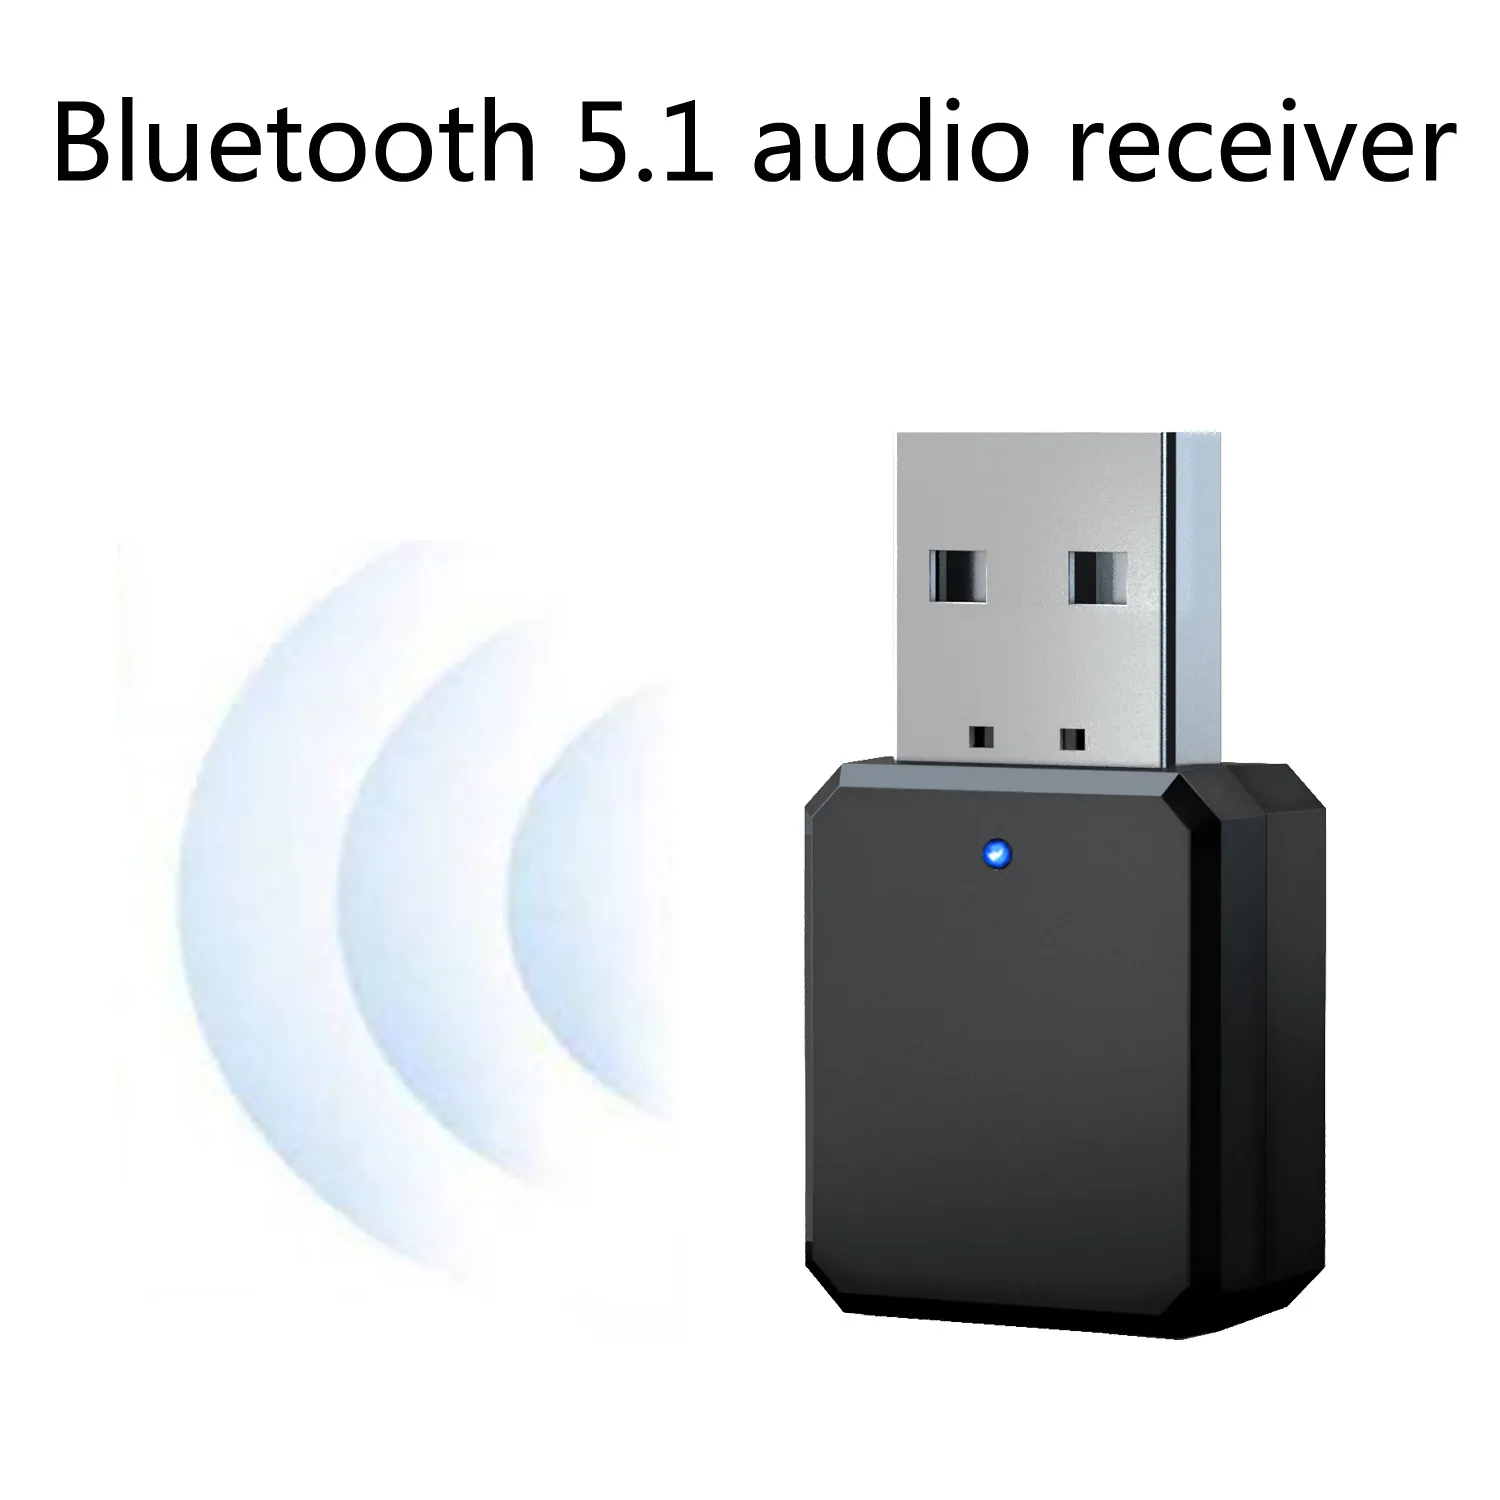 2 in 1 USB Wireless BT Music Stereo Adapter Audio Receiver Dongle Home TV PC MP3 